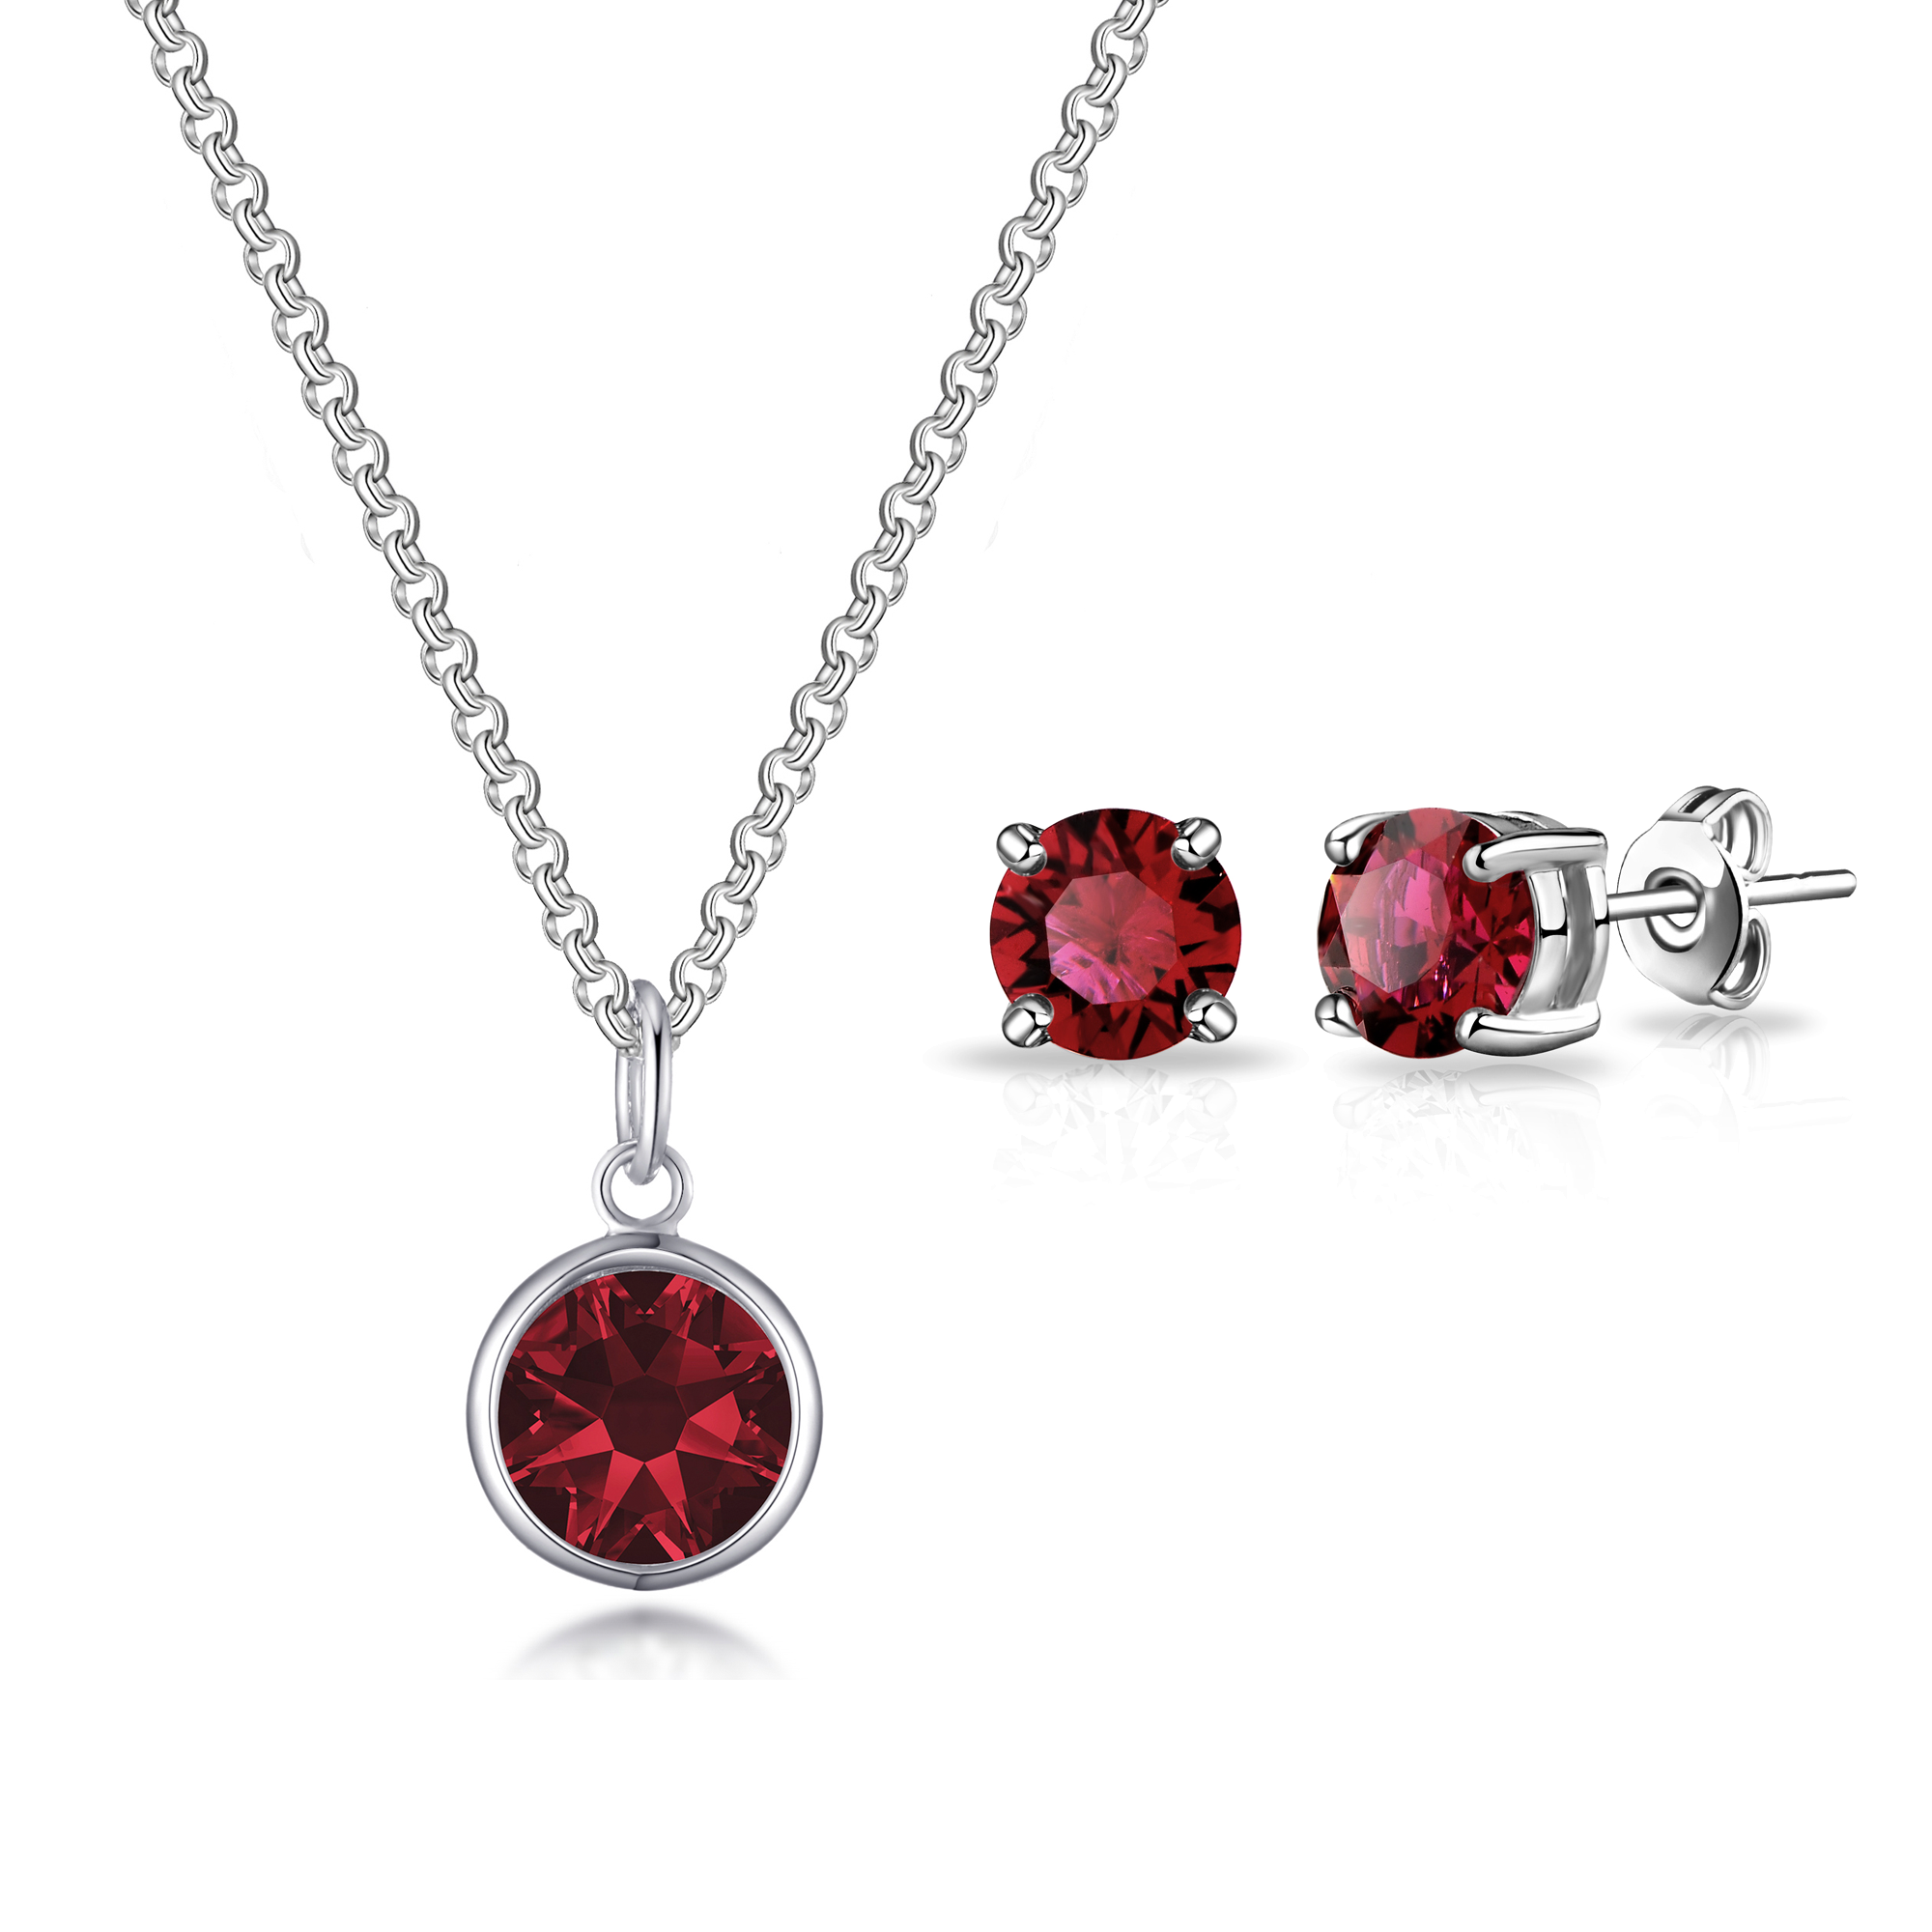 January (Garnet) Birthstone Necklace & Earrings Set Created with Zircondia® Crystals